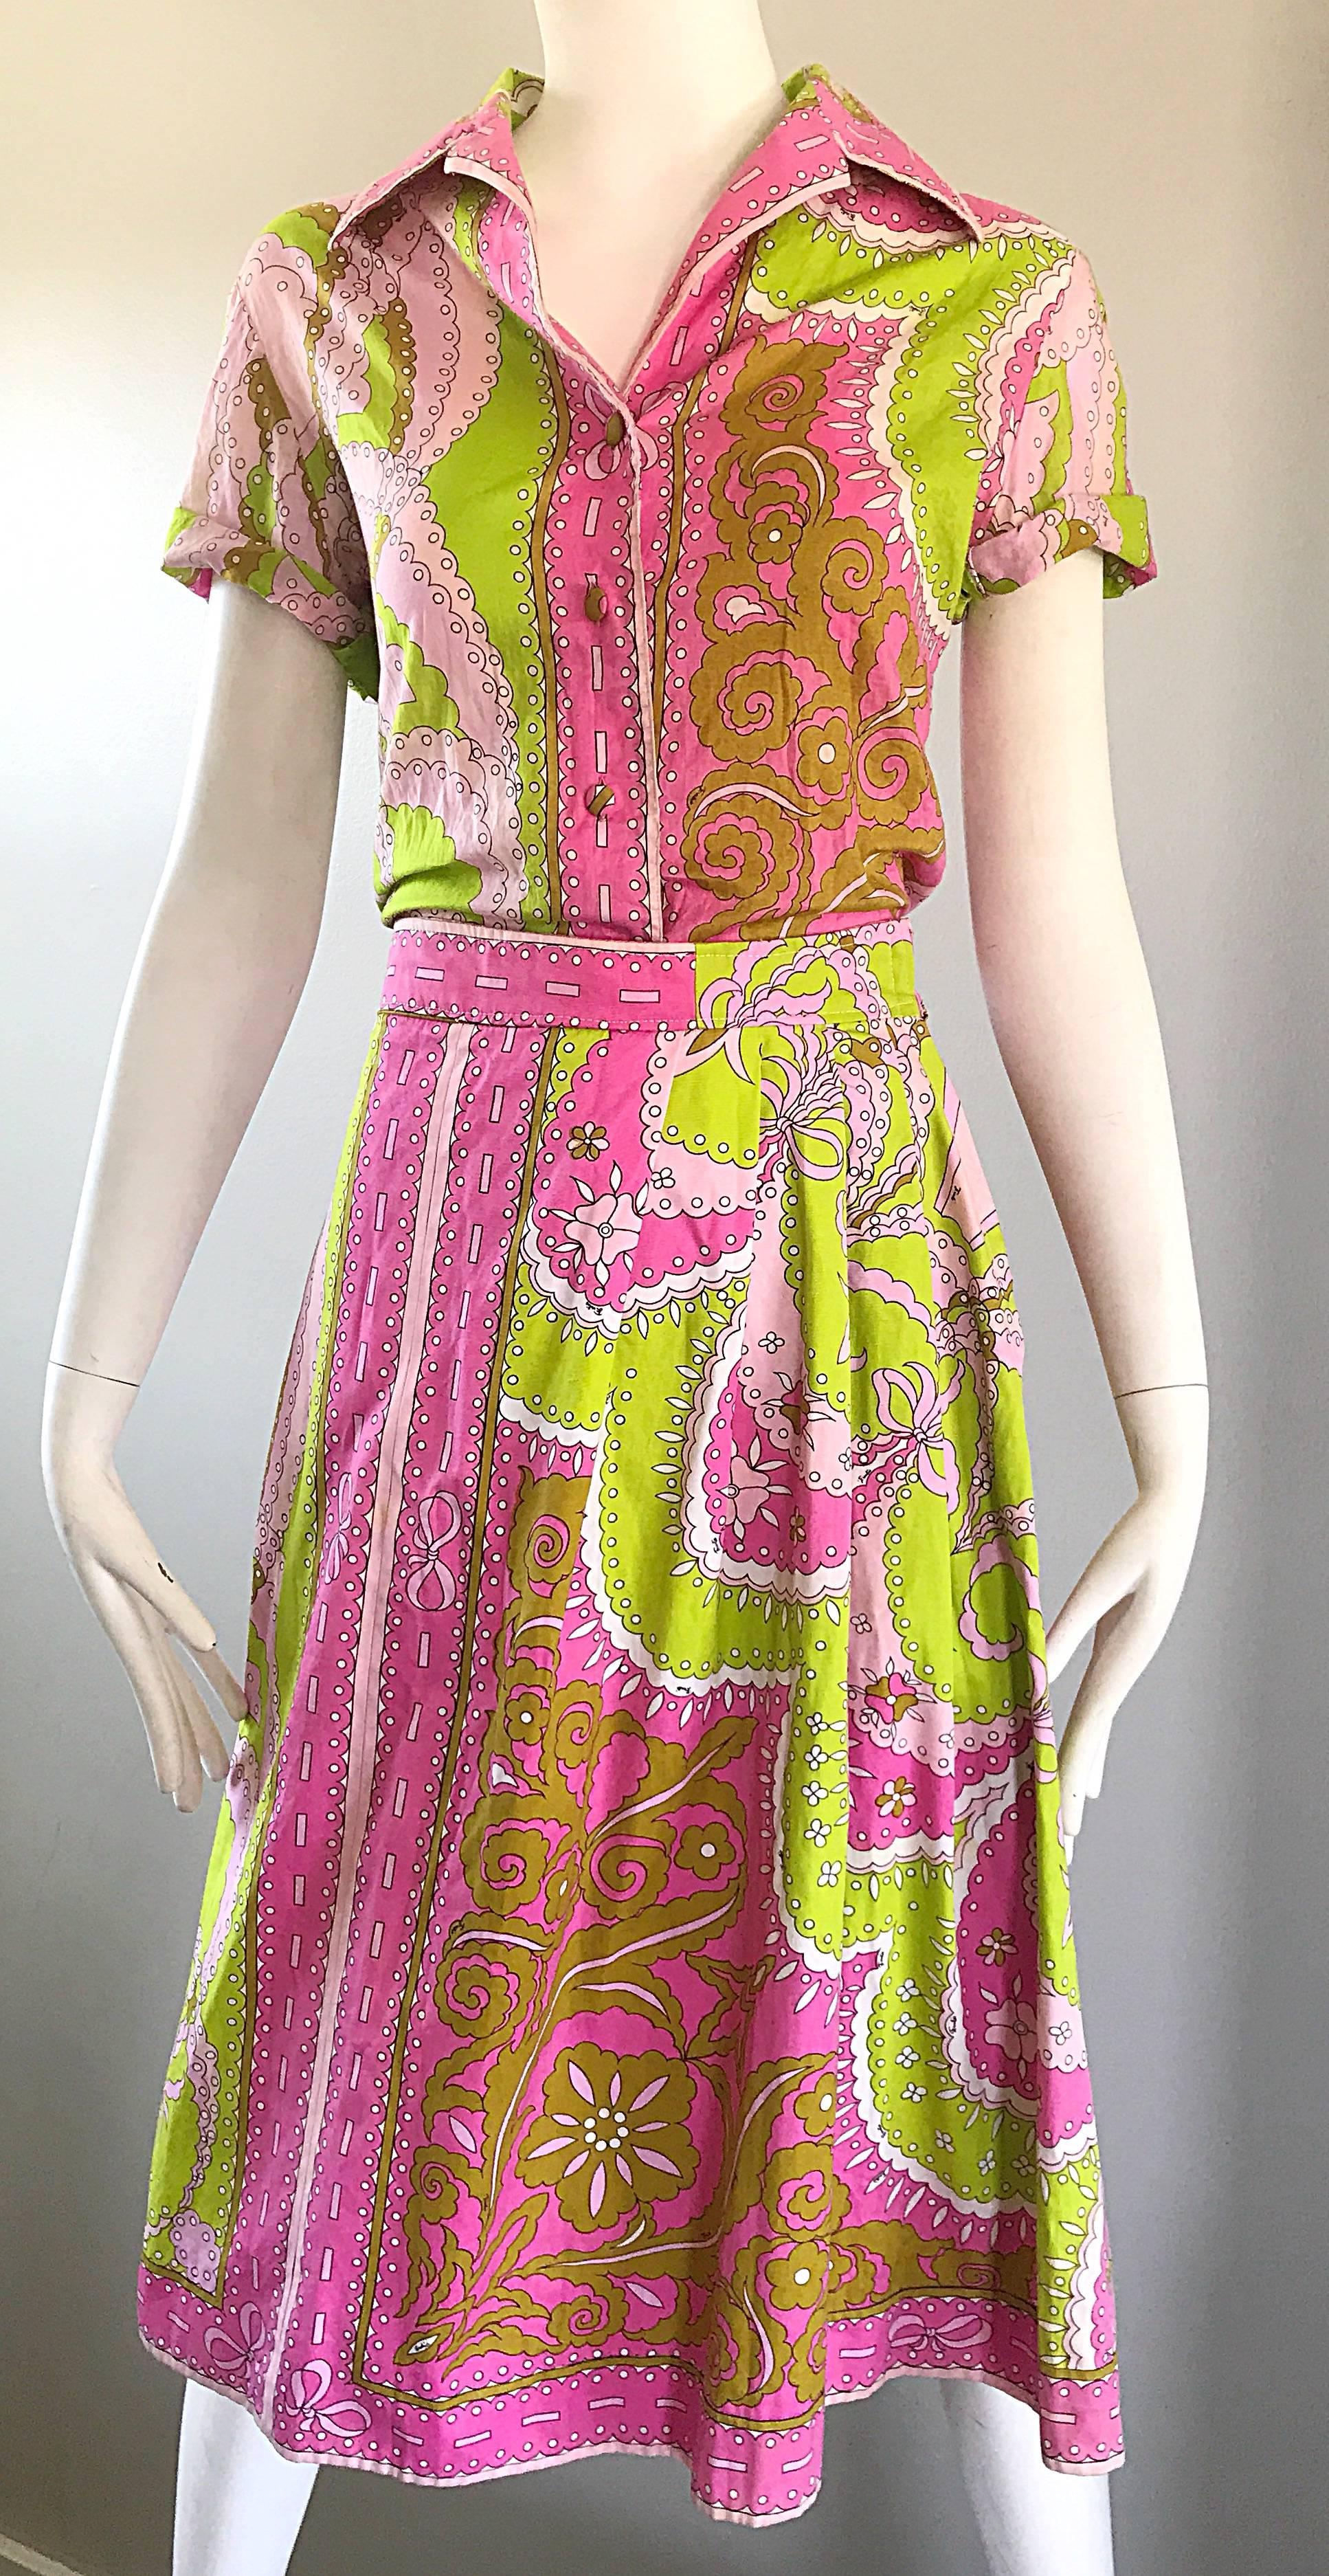 Brown 1960s Emilio Pucci Cotton Pink and Green Vintage 60s Blouse and Skirt Dress Set